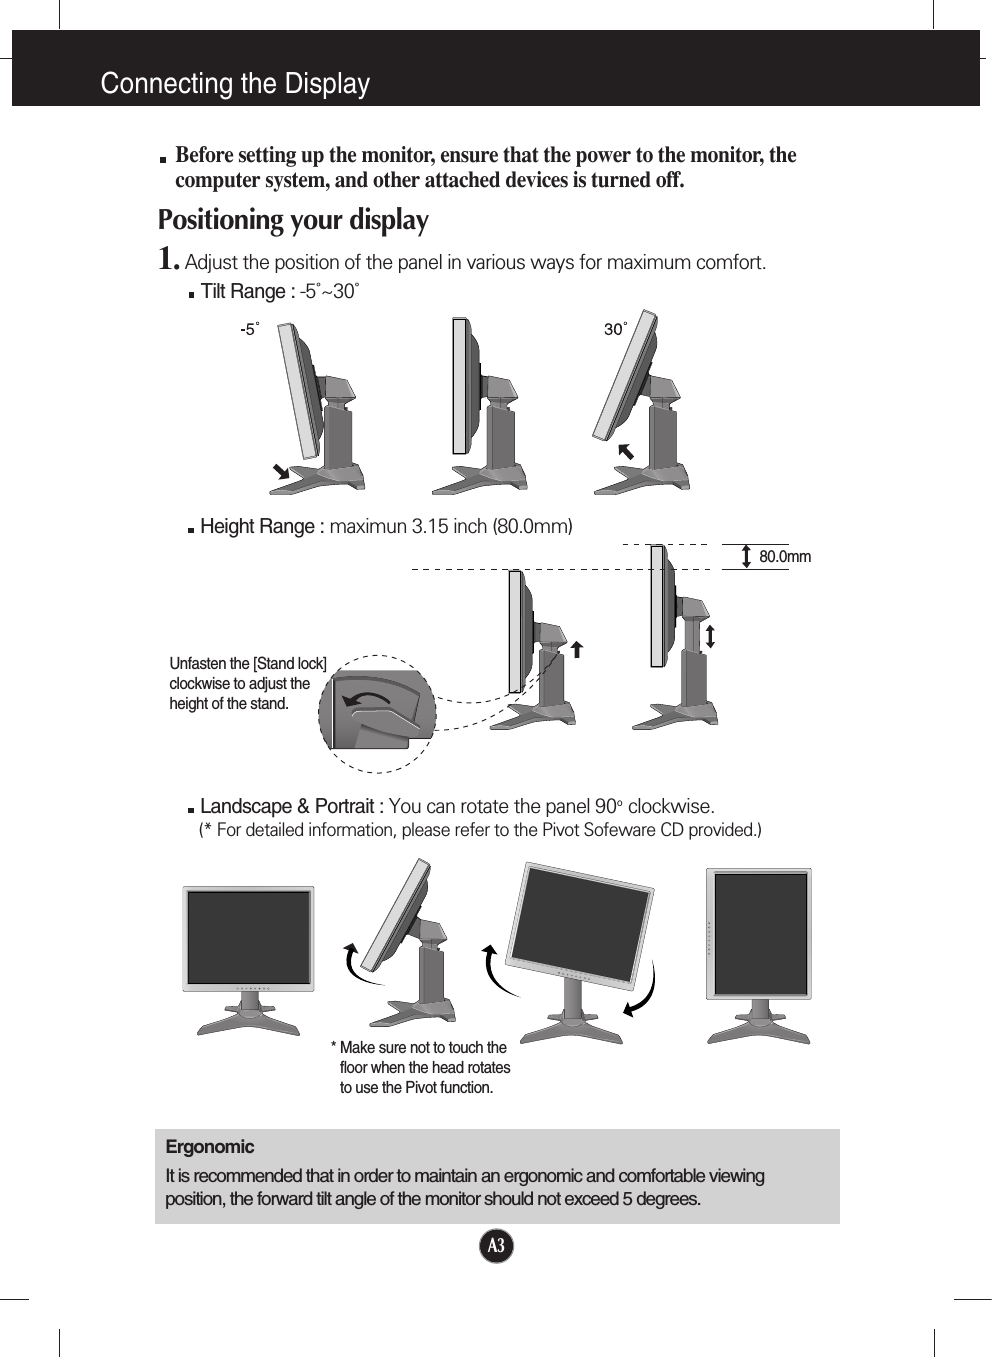 Connecting the DisplayA3Before setting up the monitor, ensure that the power to the monitor, thecomputer system, and other attached devices is turned off. Positioning your display1. Adjust the position of the panel in various ways for maximum comfort.Tilt Range : -5˚~30˚ErgonomicIt is recommended that in order to maintain an ergonomic and comfortable viewingposition, the forward tilt angle of the monitor should not exceed 5 degrees.Height Range : maximun 3.15 inch (80.0mm)Landscape &amp; Portrait : You can rotate the panel 90o  clockwise. (* For detailed information, please refer to the Pivot Sofeware CD provided.)* Make sure not to touch thefloor when the head rotatesto use the Pivot function.80.0mmUnfasten the [Stand lock]clockwise to adjust theheight of the stand.